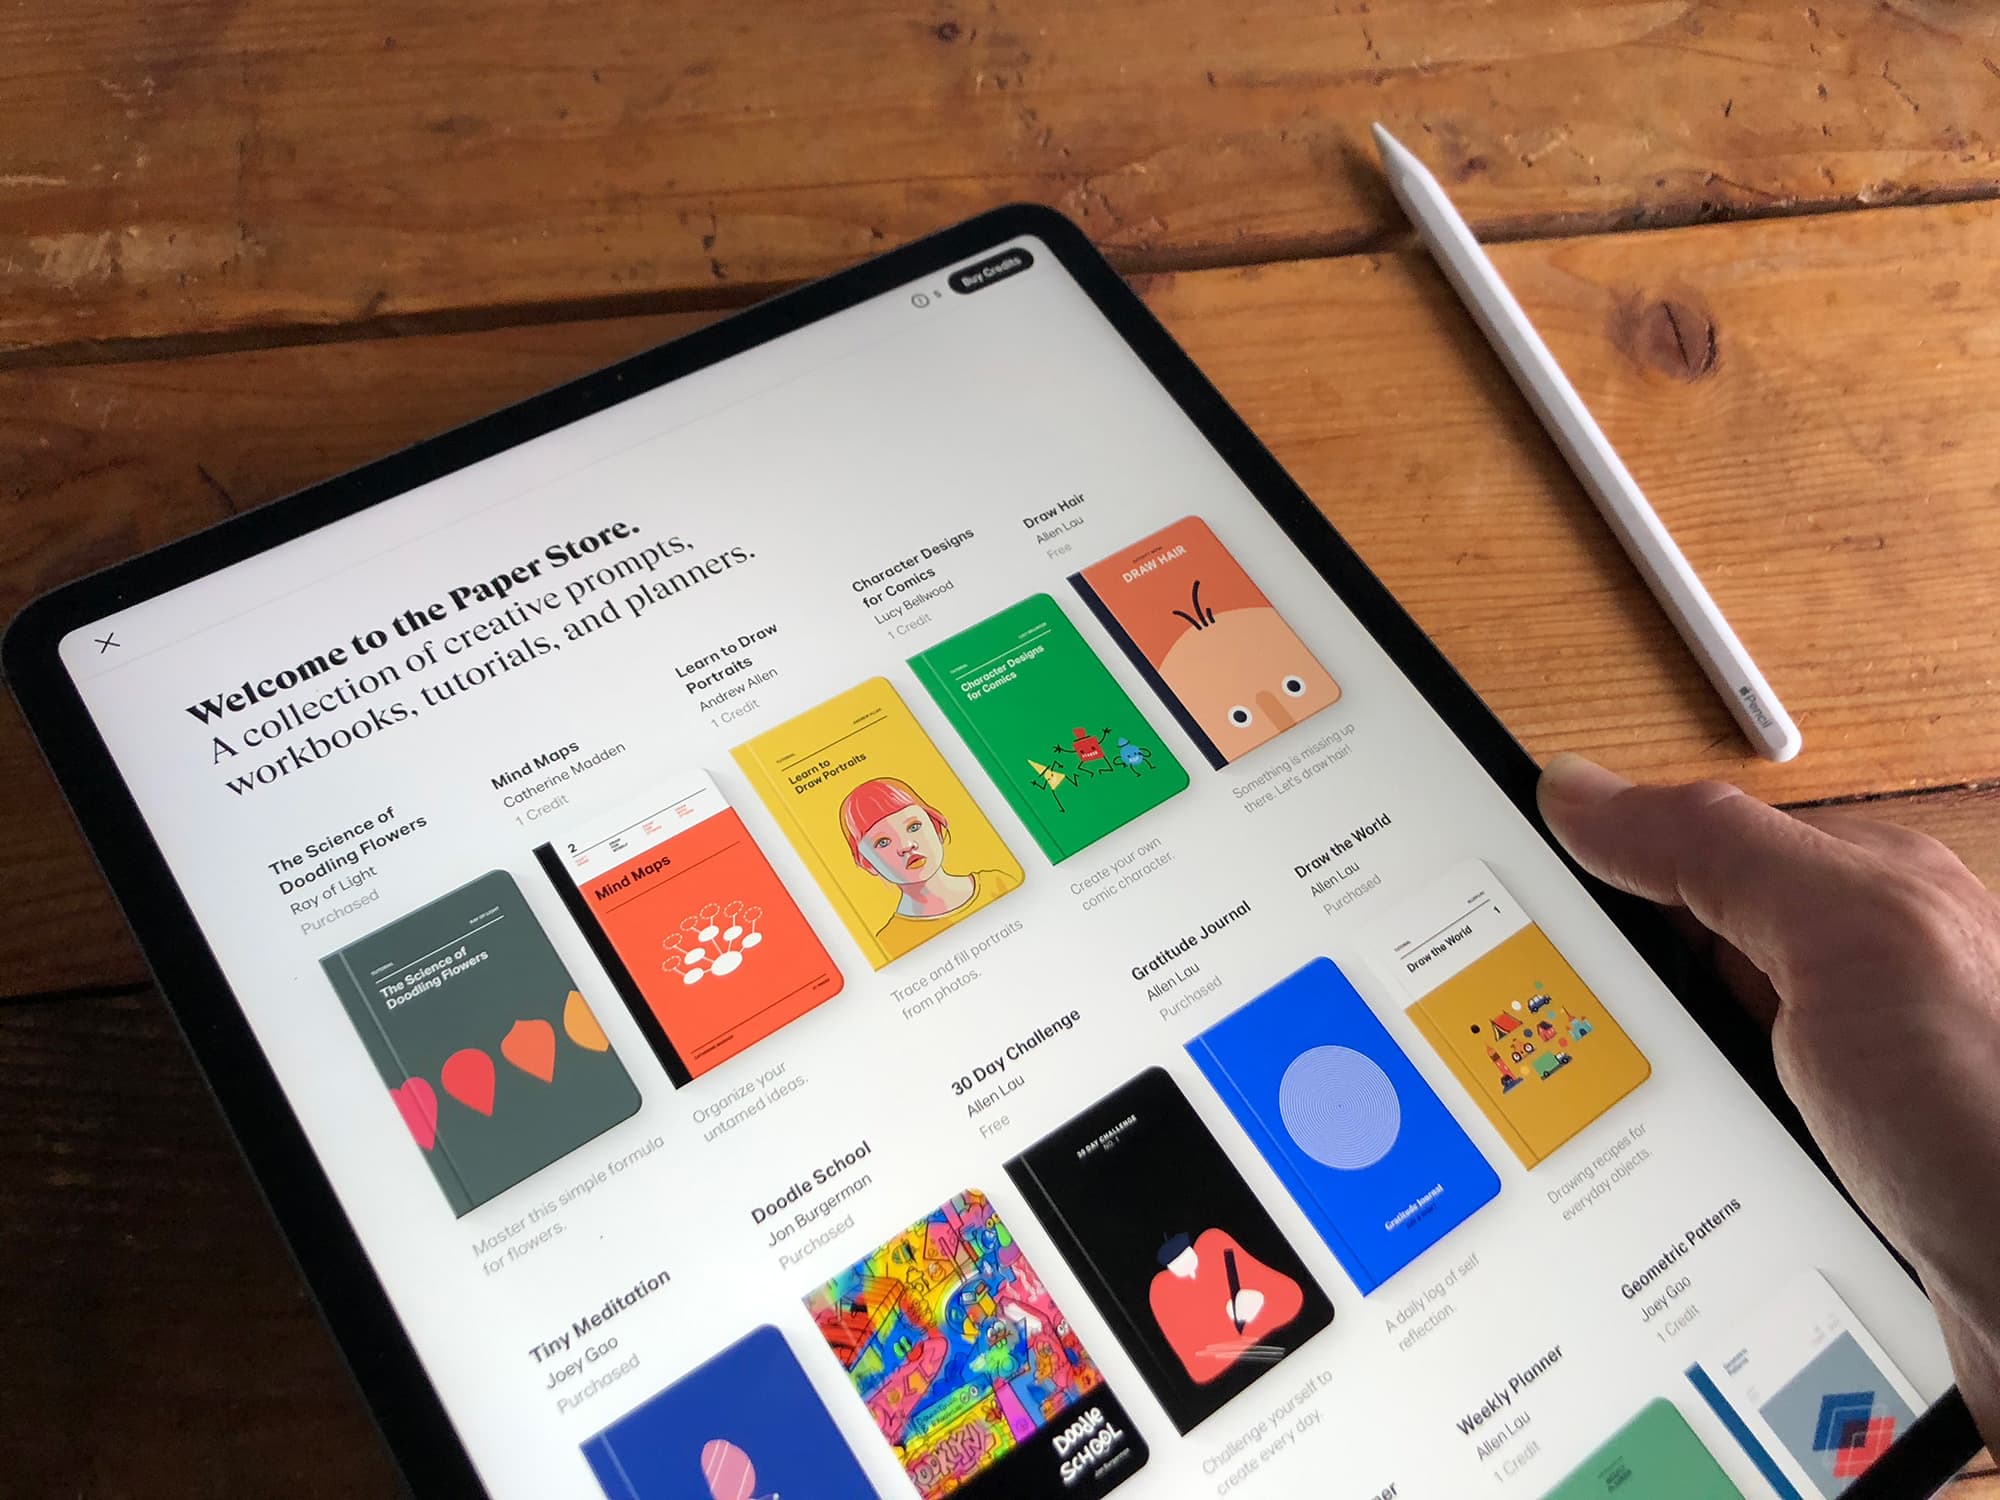 These exquisitely designed digital journals in Paper by WeTransfer will get anyone’s creative juices flowing.